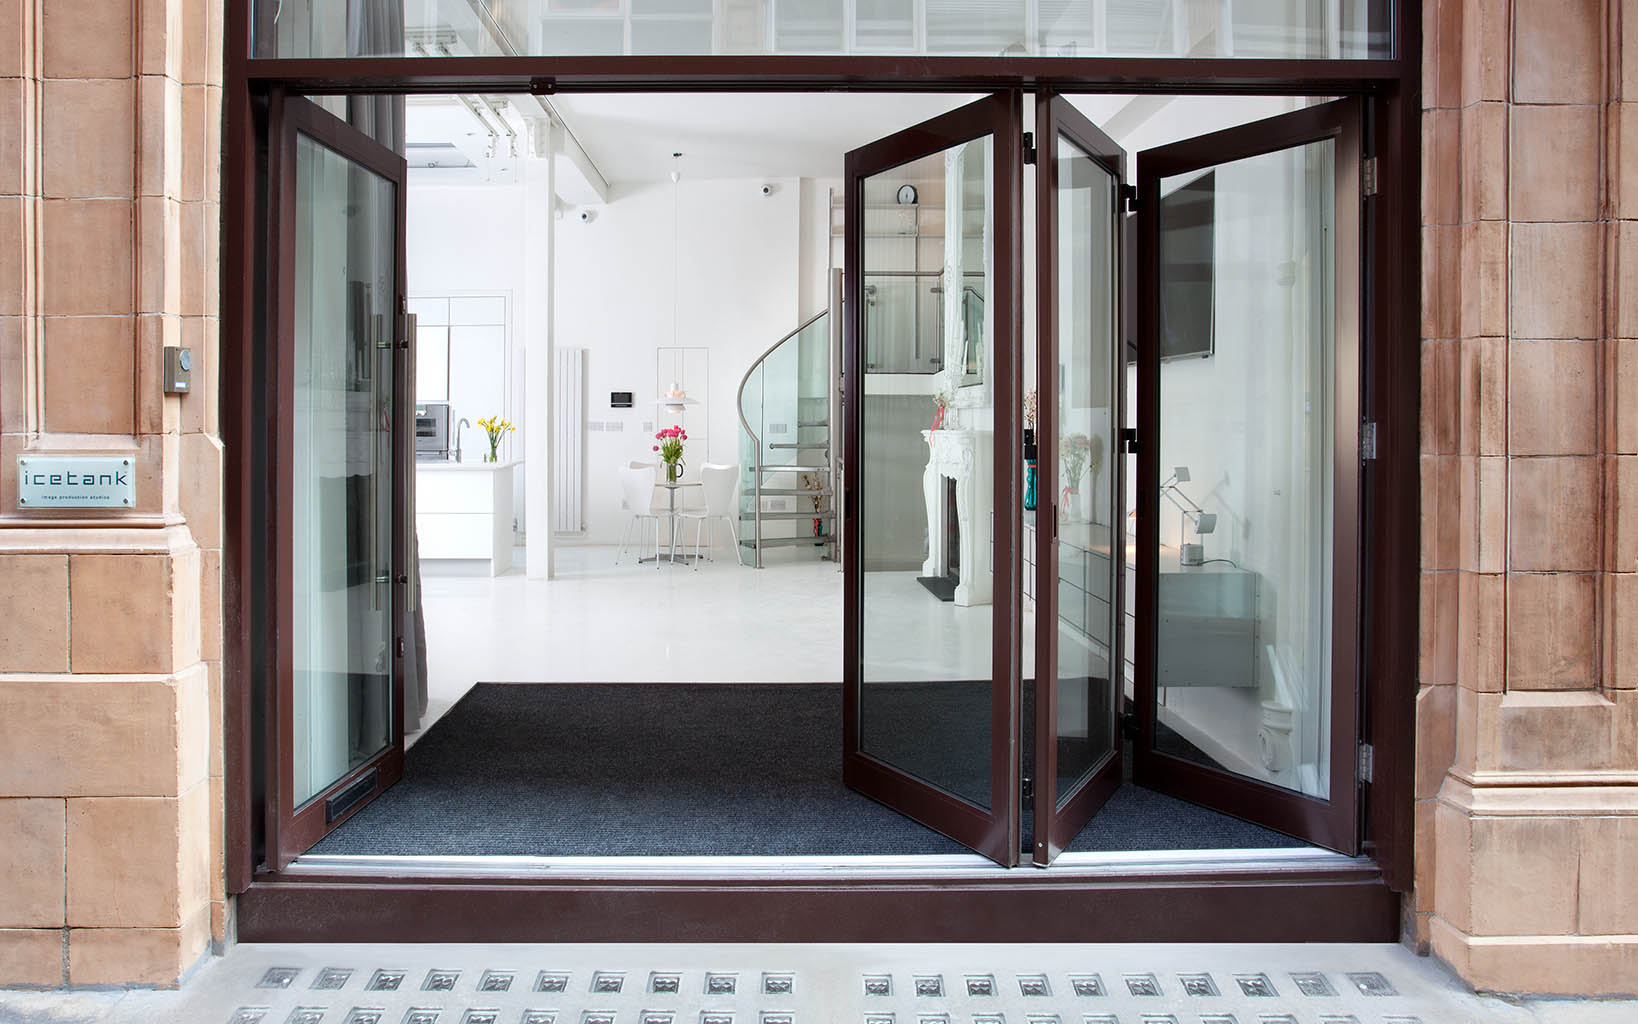 Studio entrance of Packshot Factory's Central London Photography and Film studio